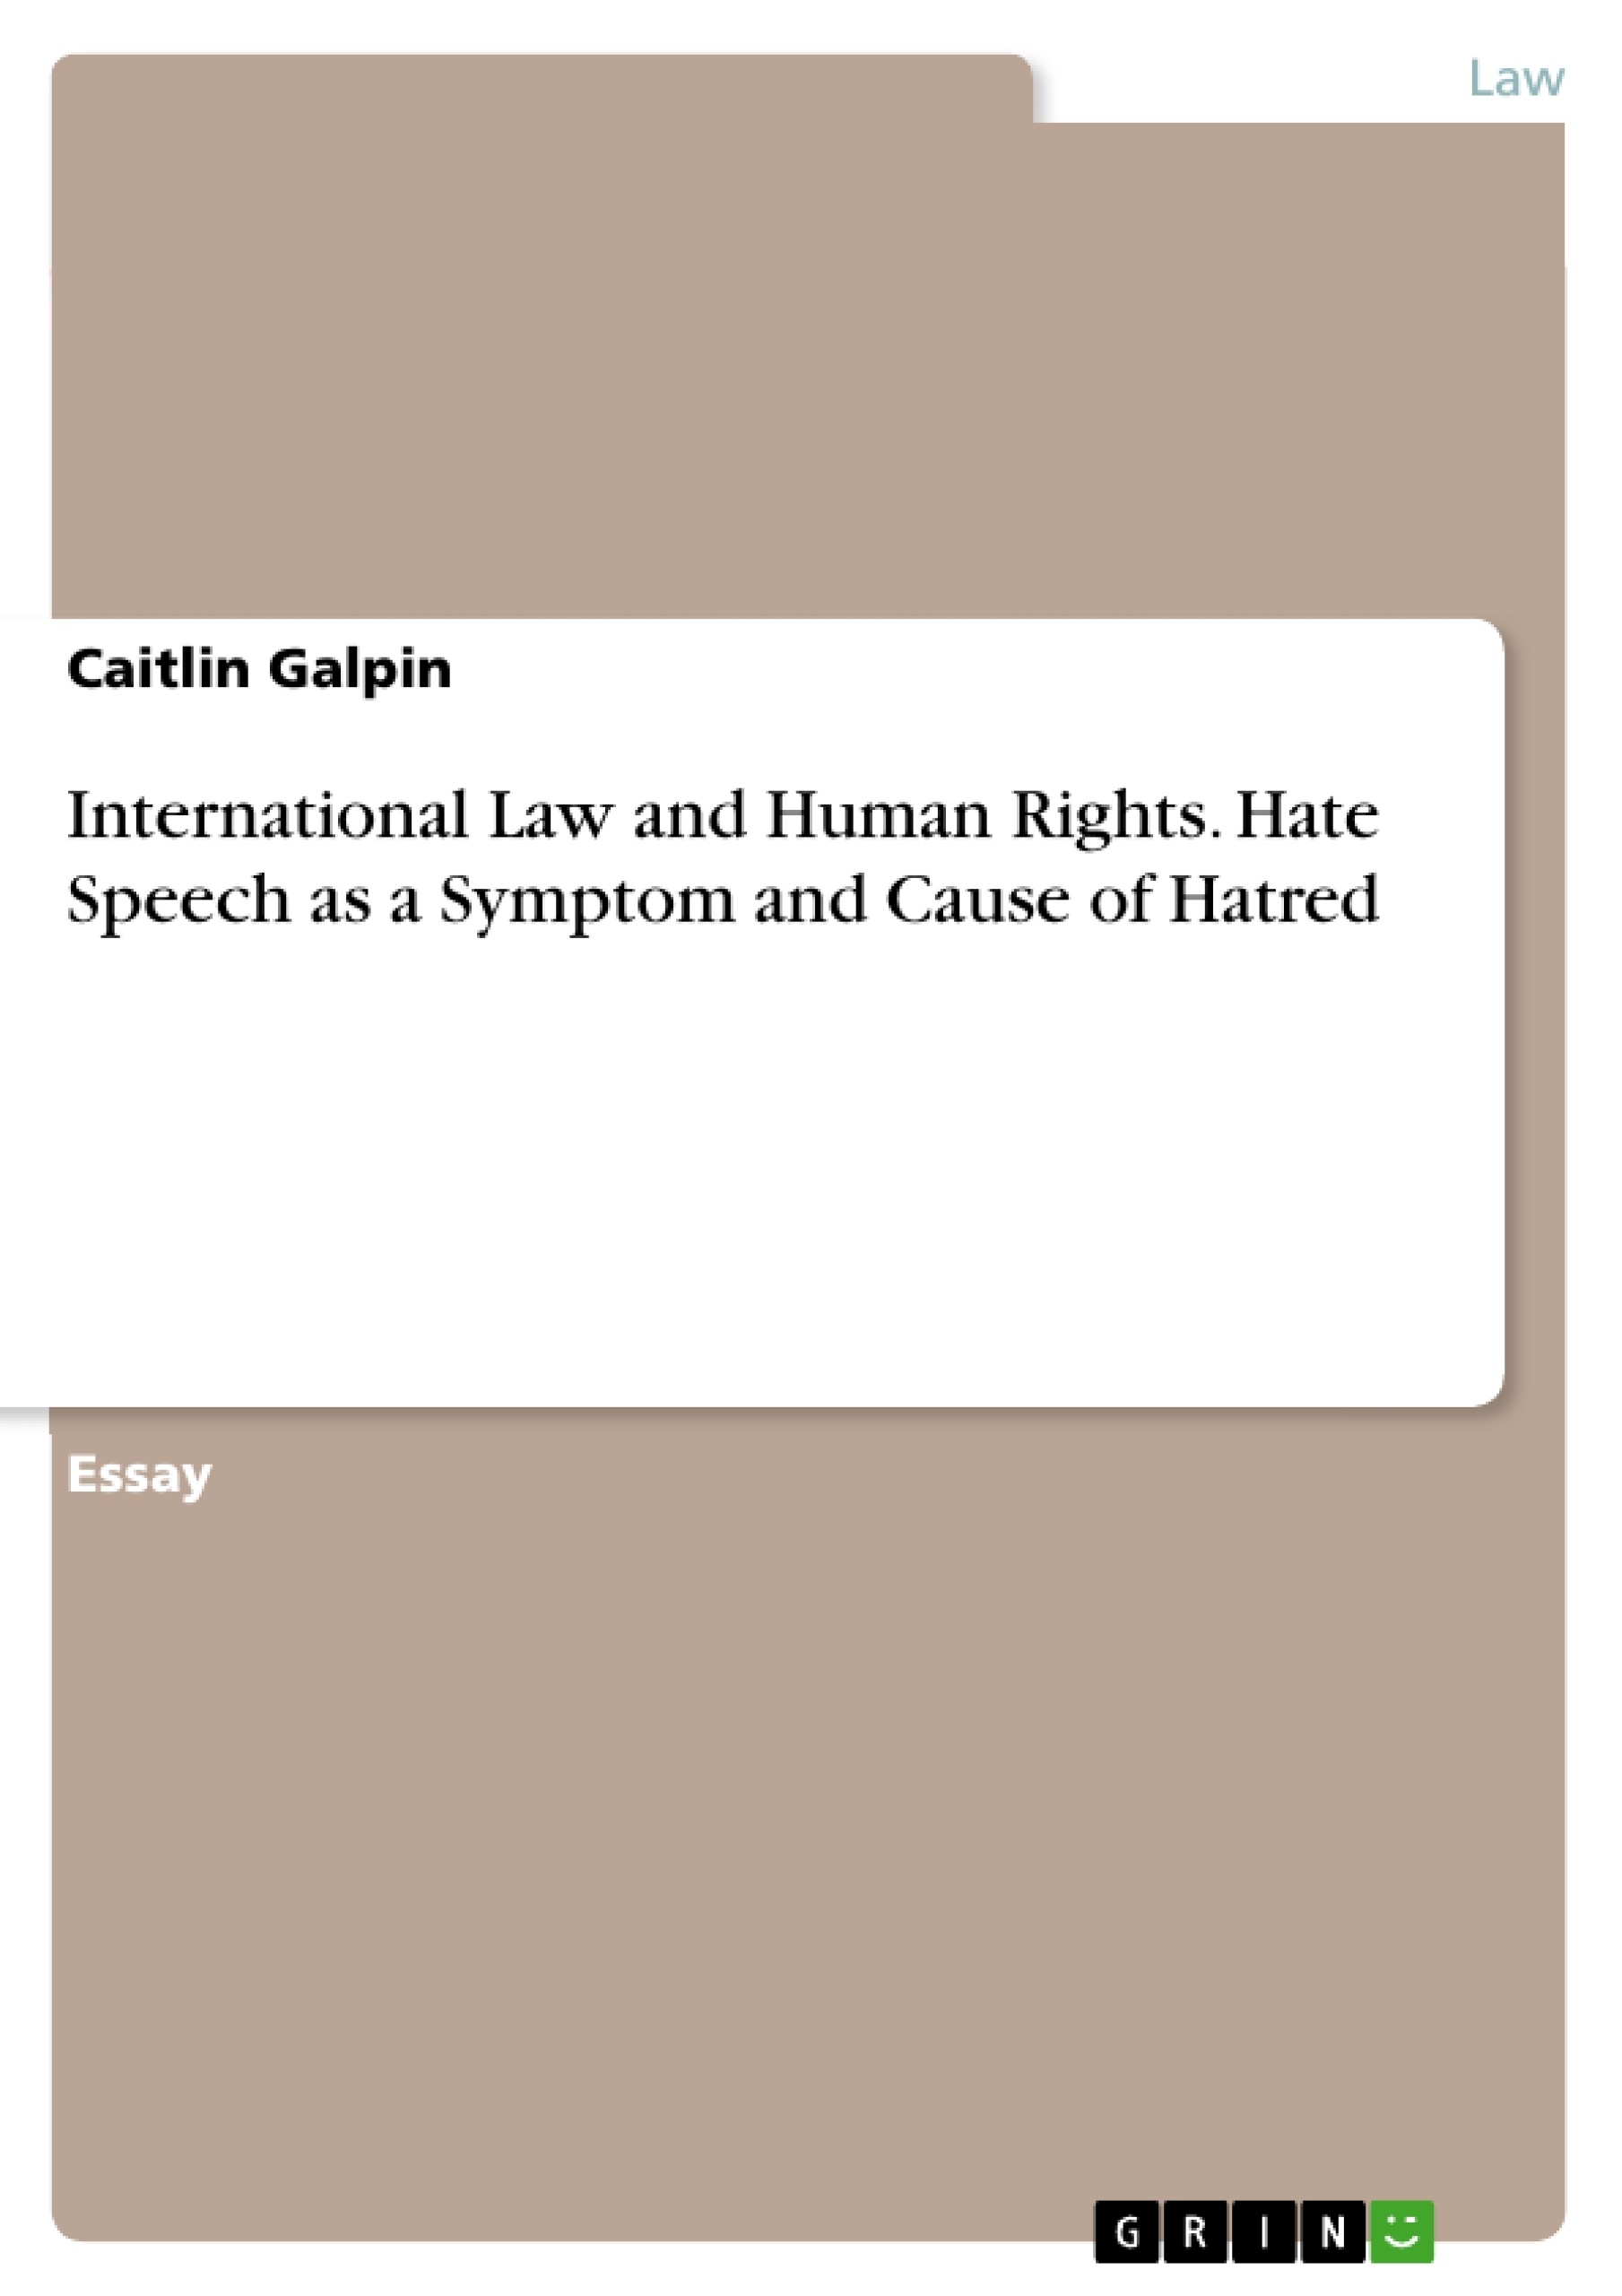 Title: International Law and Human Rights.
Hate Speech as a Symptom and Cause of Hatred